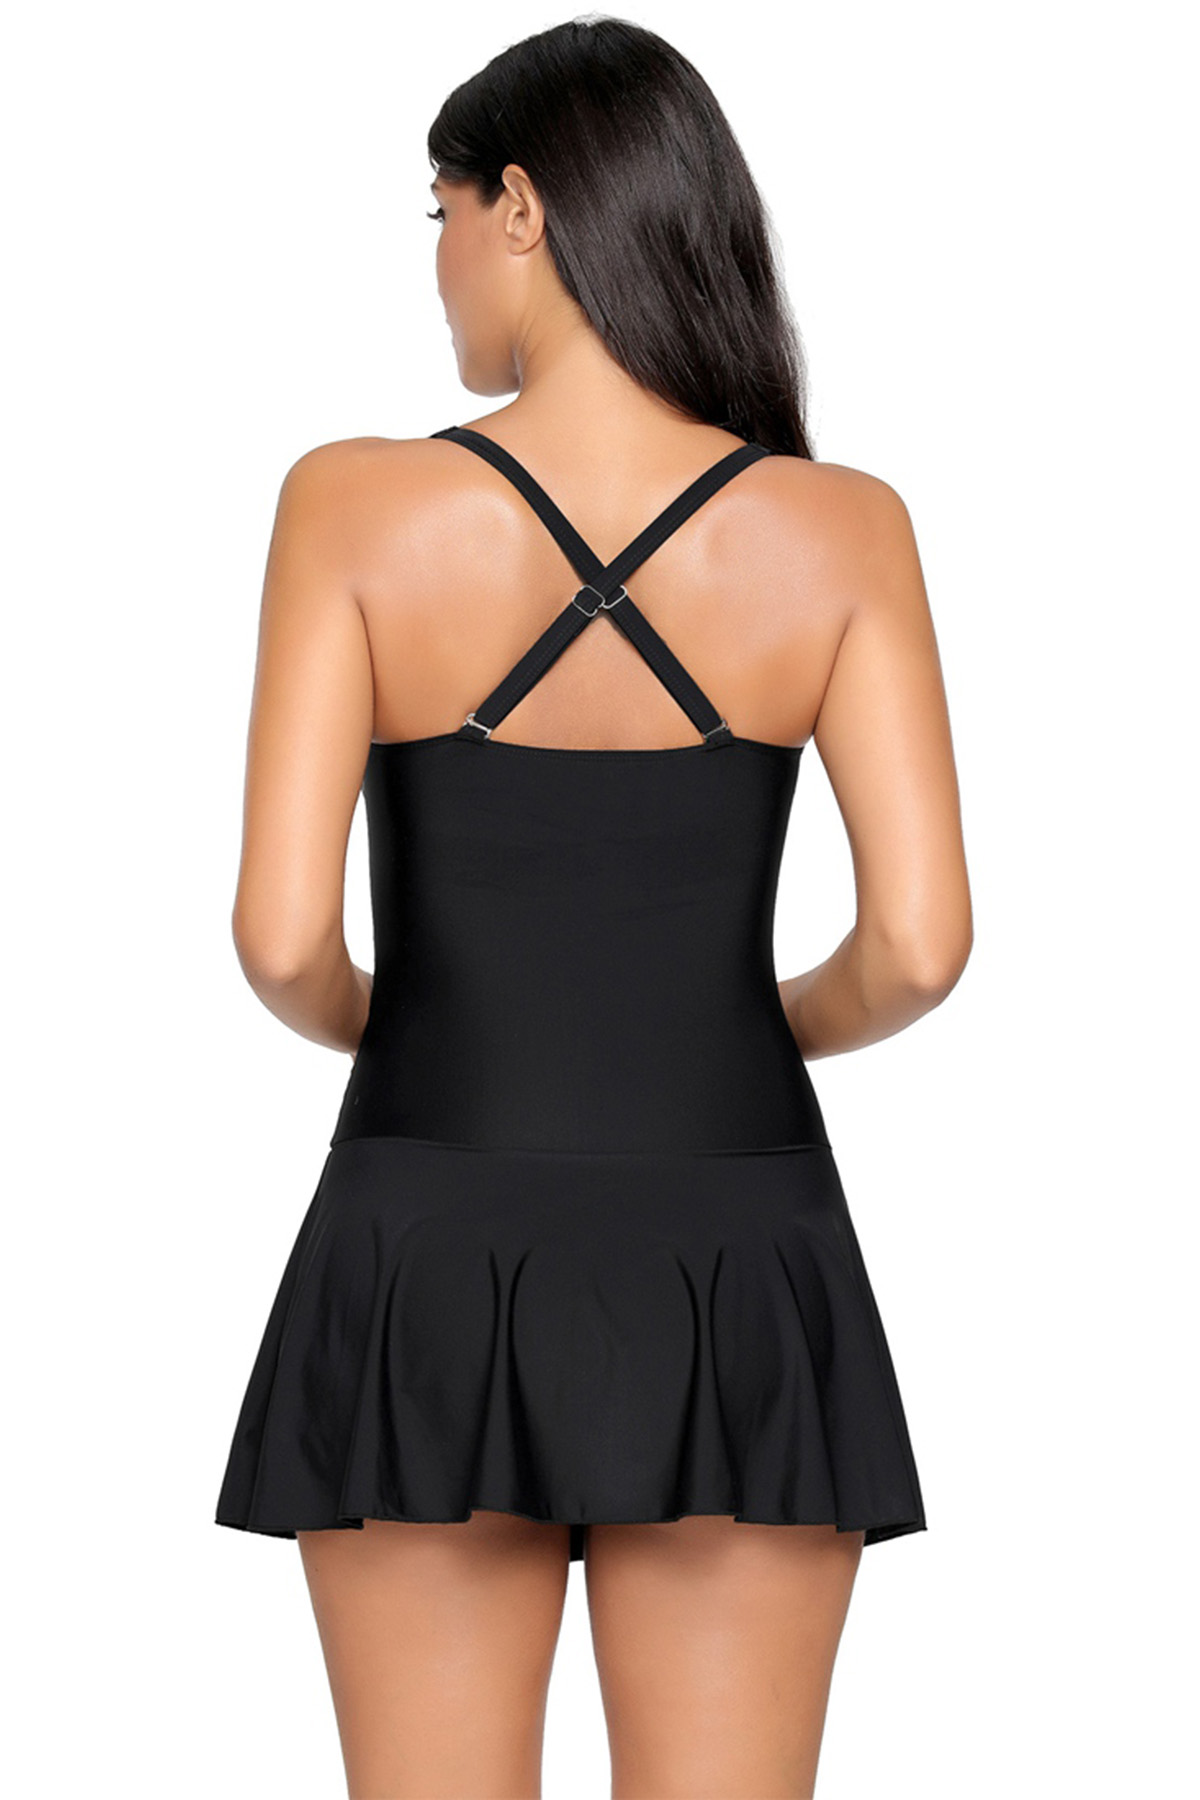 BY410809-2 SOLID BLACK SWIMDRESS WITH ATTACHED SHORTS